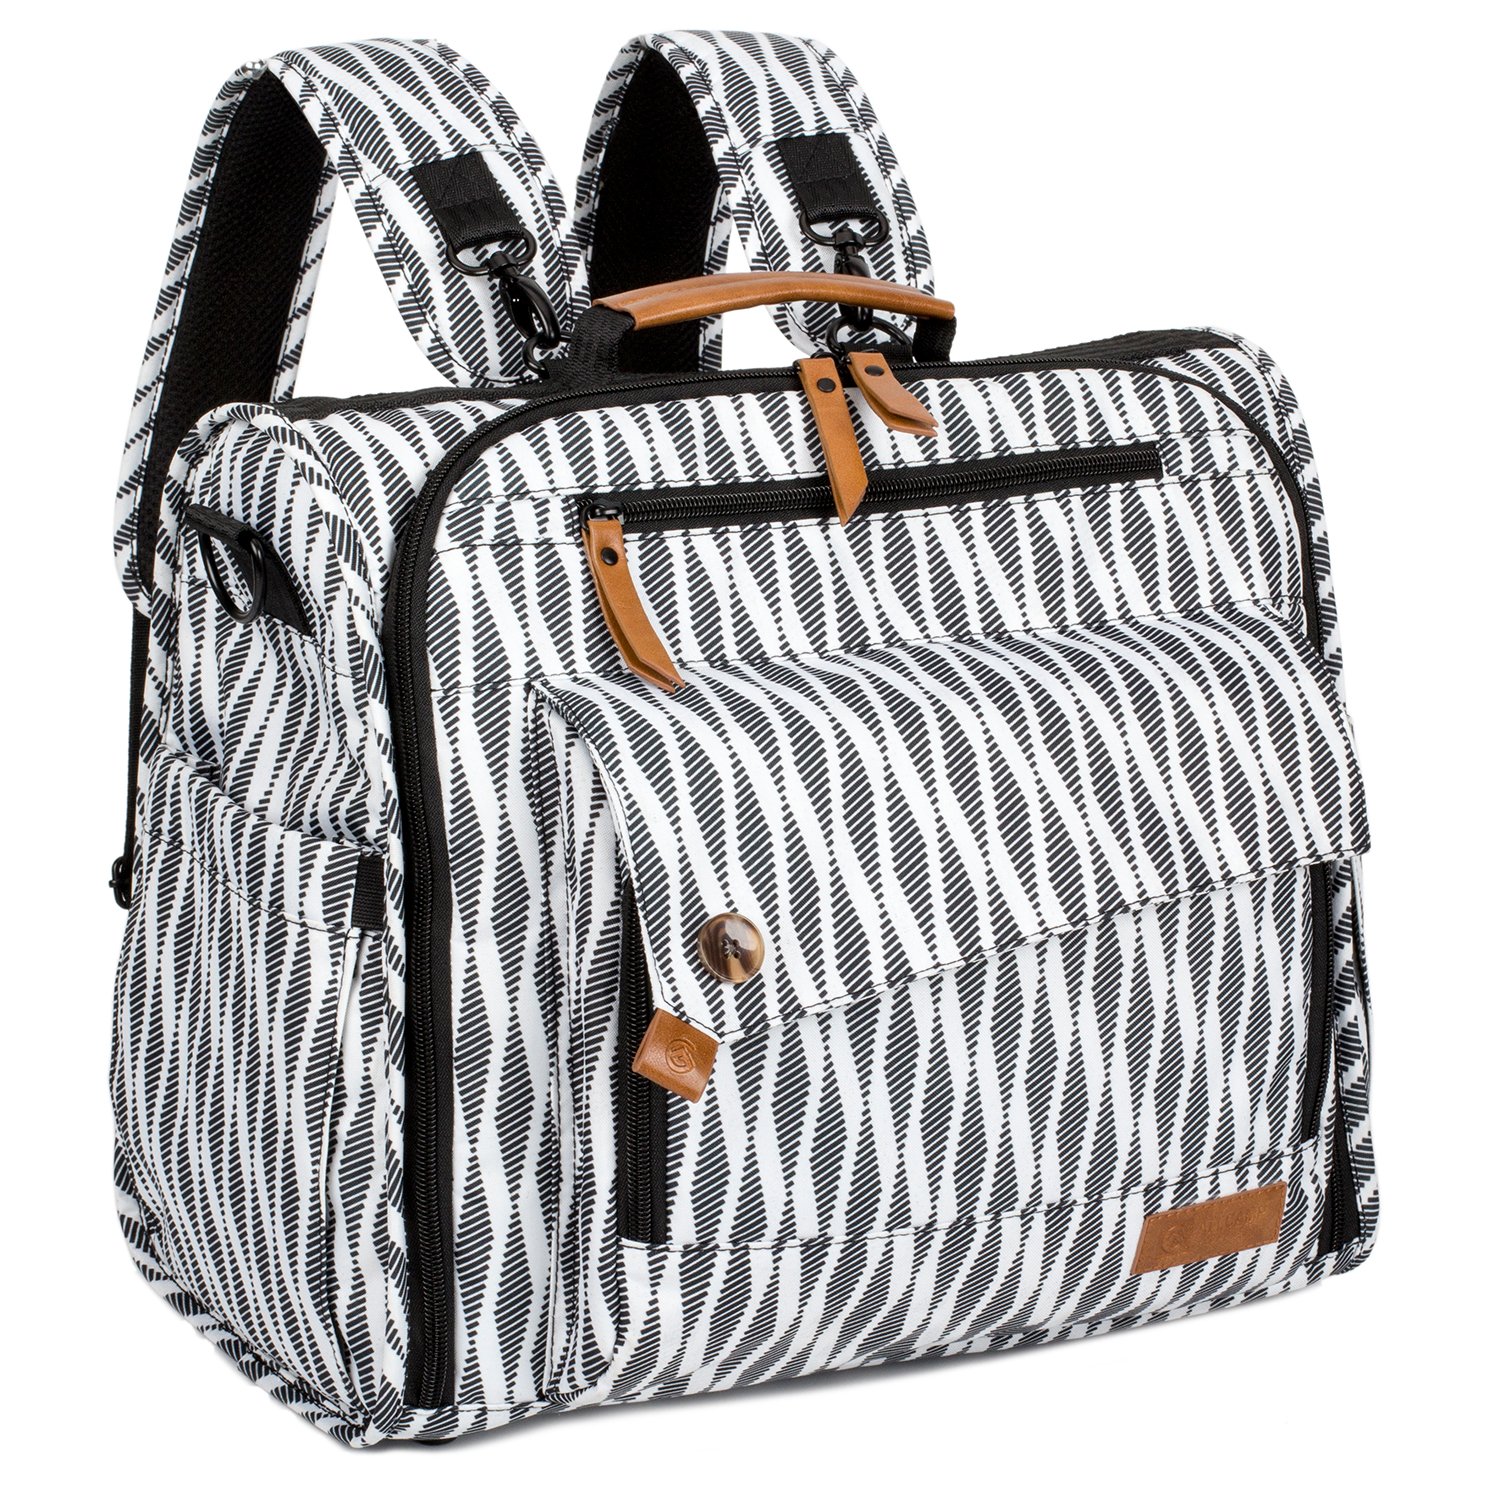 Buy Polka Tots Stylish Diaper Bag Unicorn Print Online at Best Price |  Mothercare India